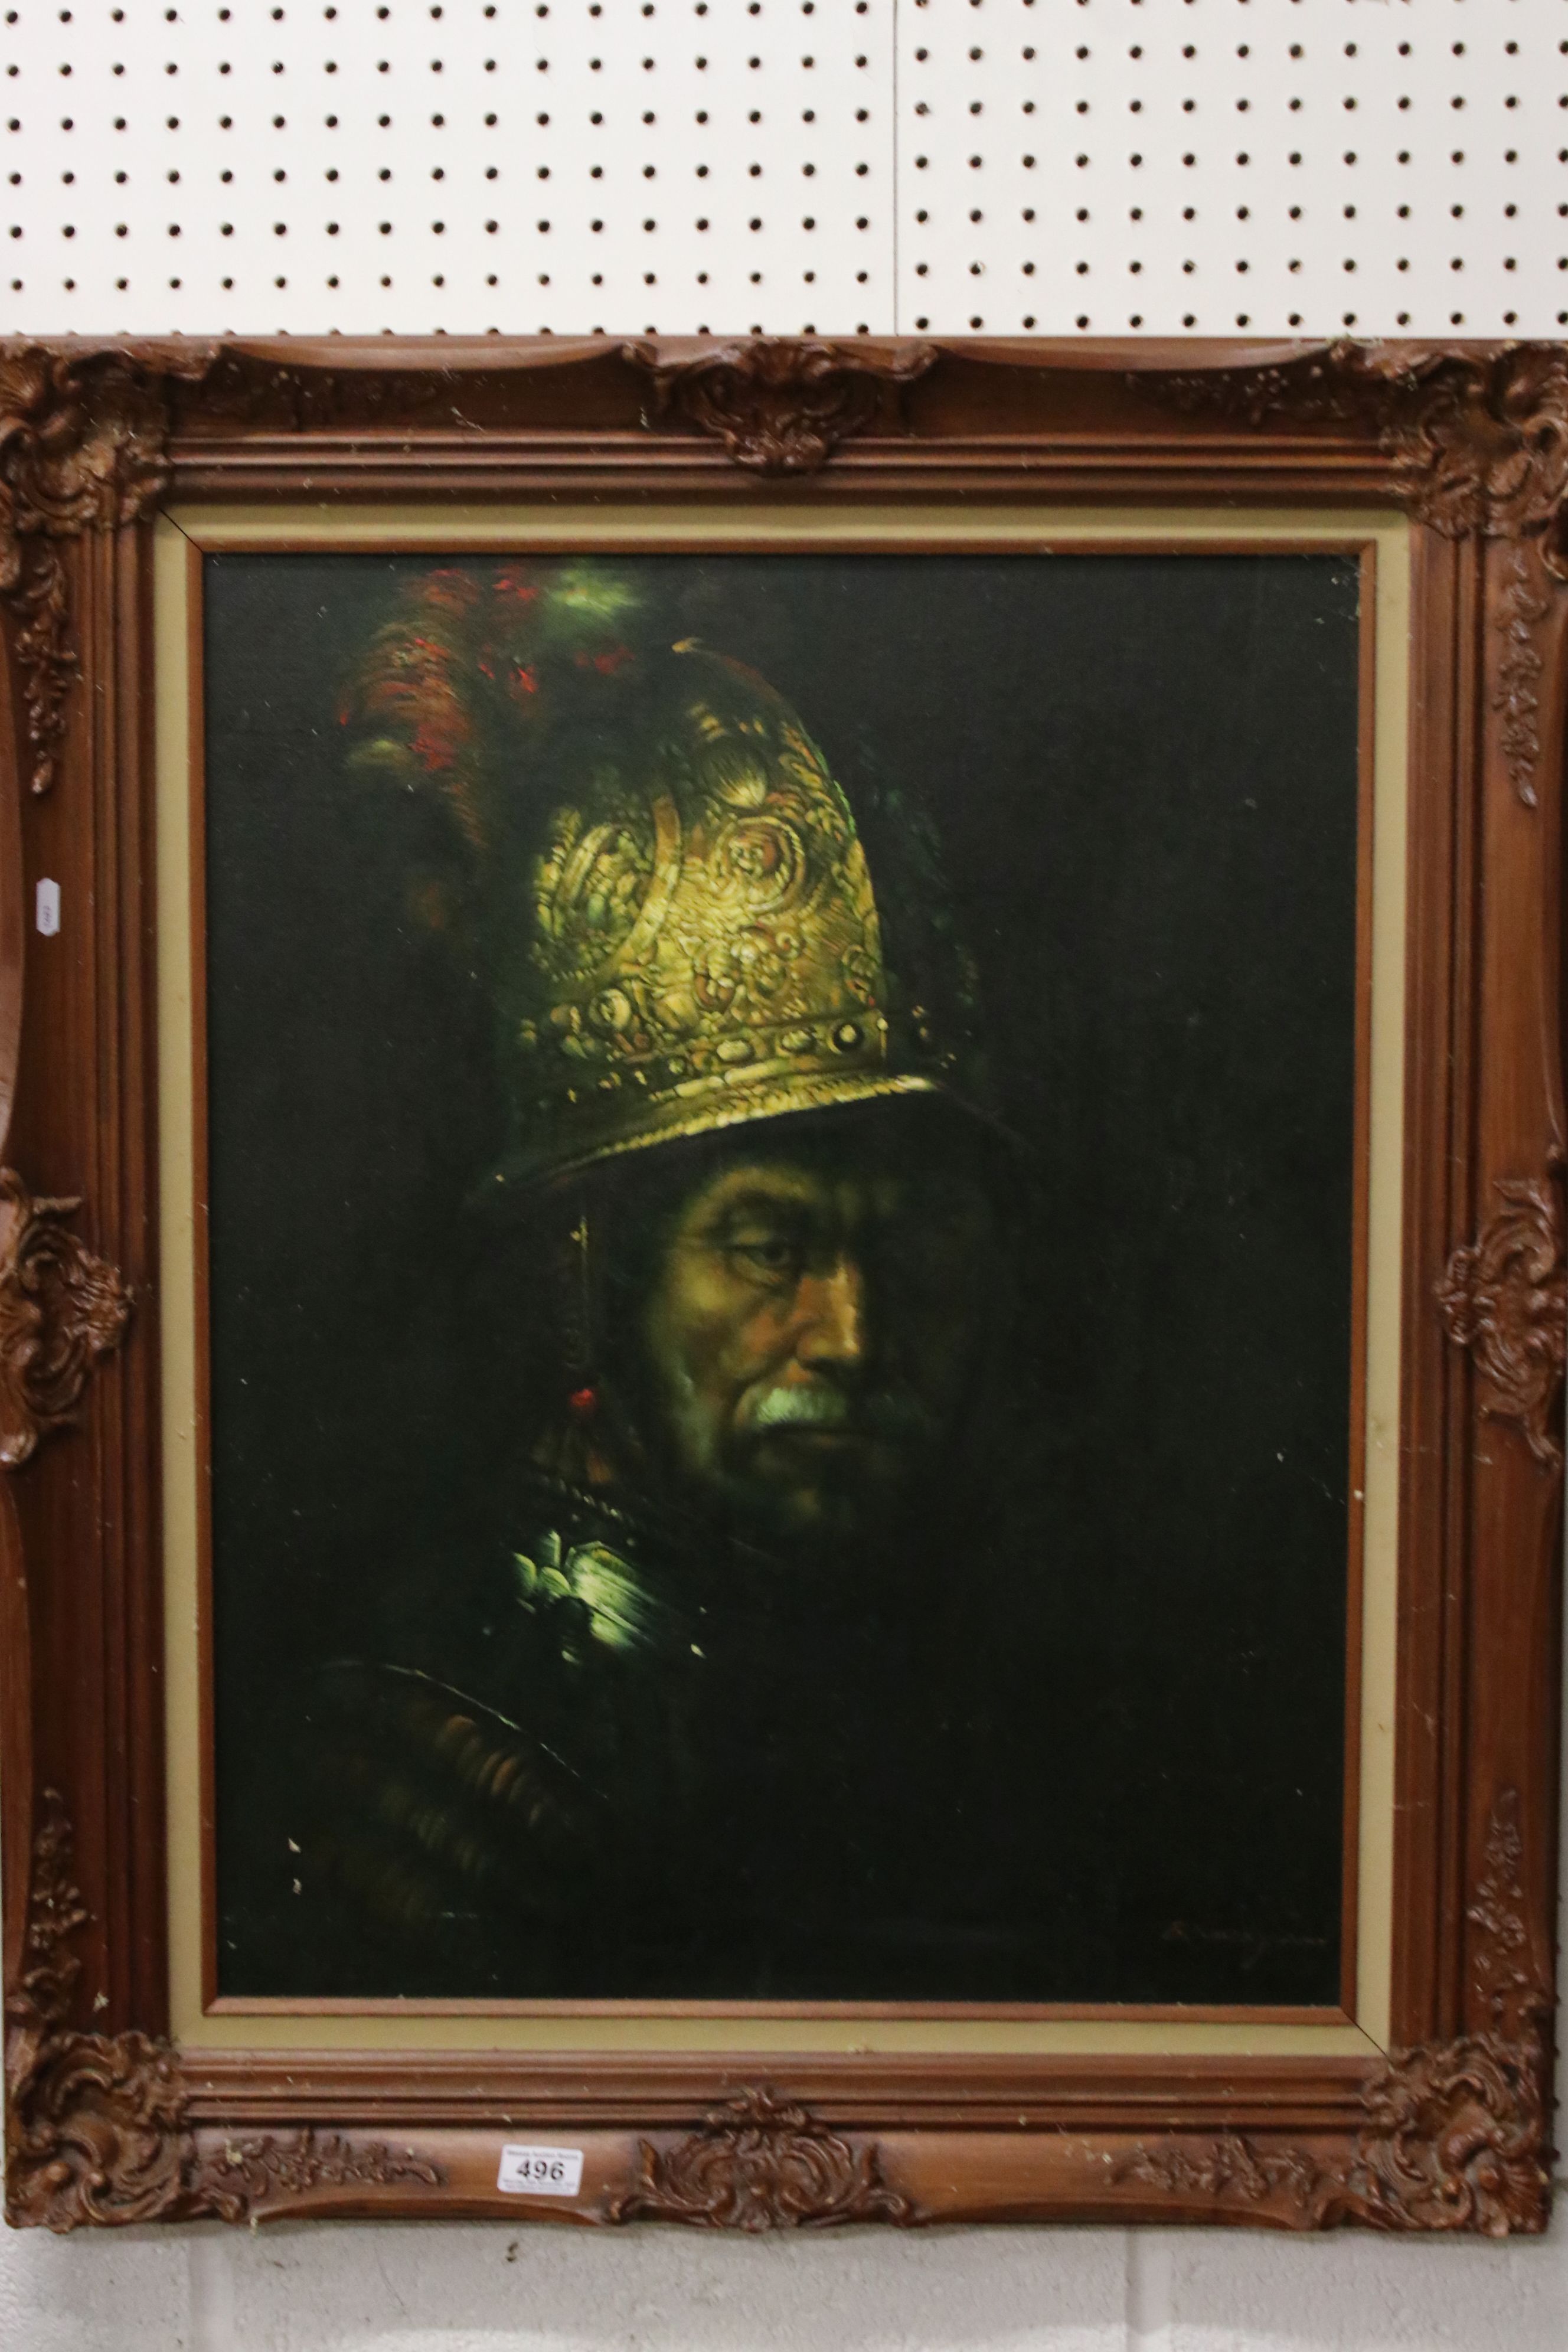 20th century Oil Painting on Canvas, after Rembrandt, Portrait of a Conquistador ' Man with the